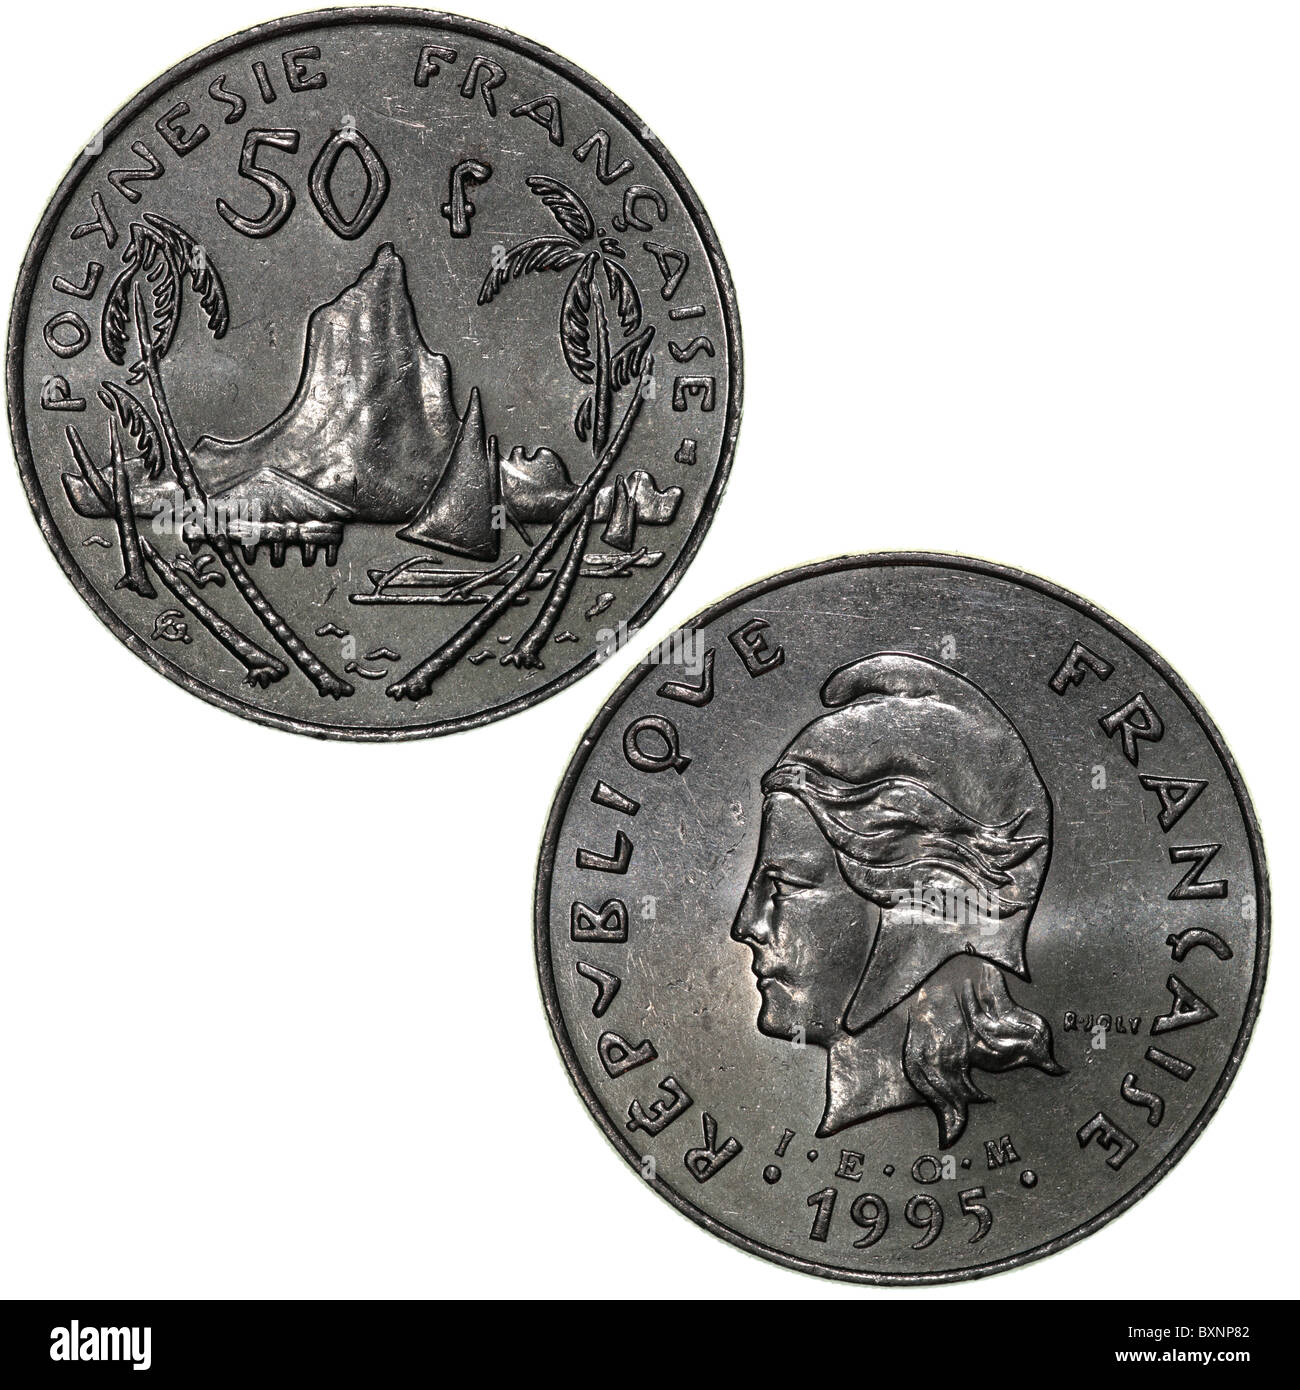 New Caledonia 50F coin with a Marianne head (obverse) engraved by R. Joly and Moorea Harbor (reverse) designed by A. Guzman-Nageotte Stock Photo